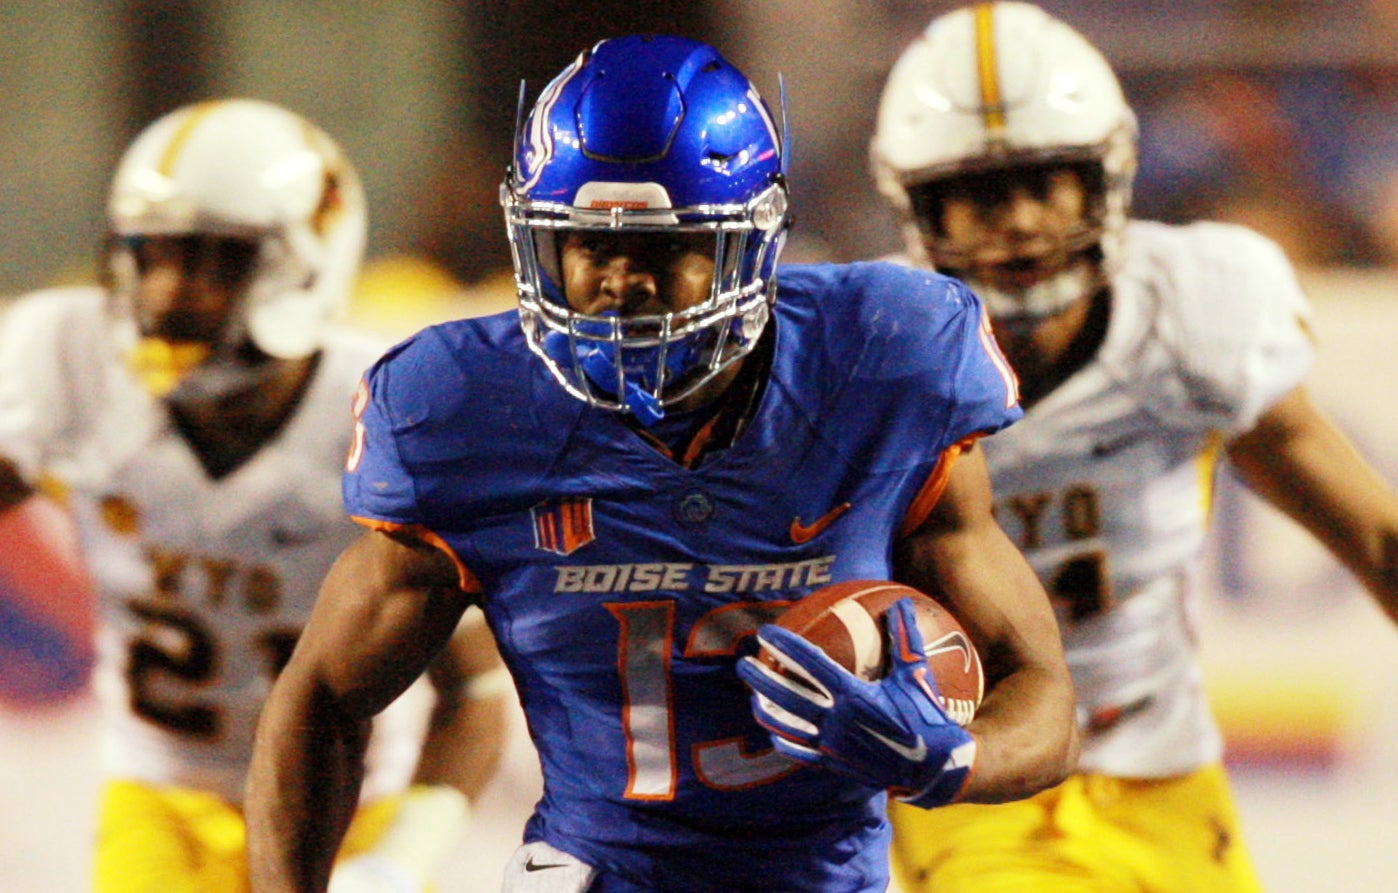 Boise State vs. Wyoming: TV info, predictions and storylines